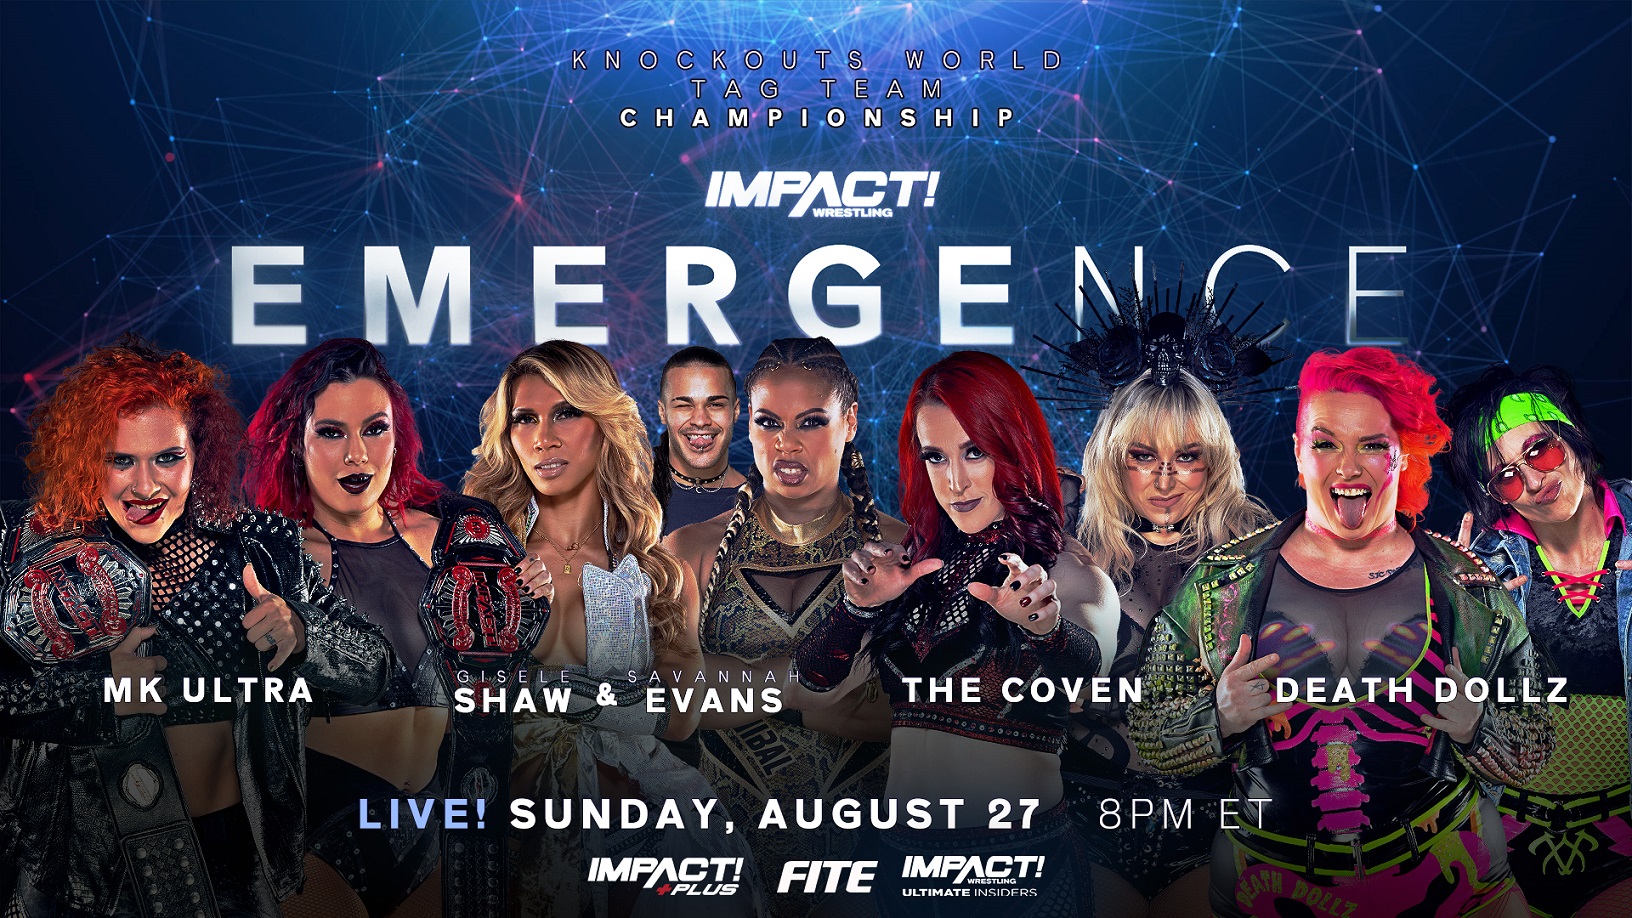 The Coven & Death Dollz Join the Fray at Emergence, MK Ultra Will Now Defend Knockouts World Tag Team Titles in 4-Way – IMPACT Wrestling